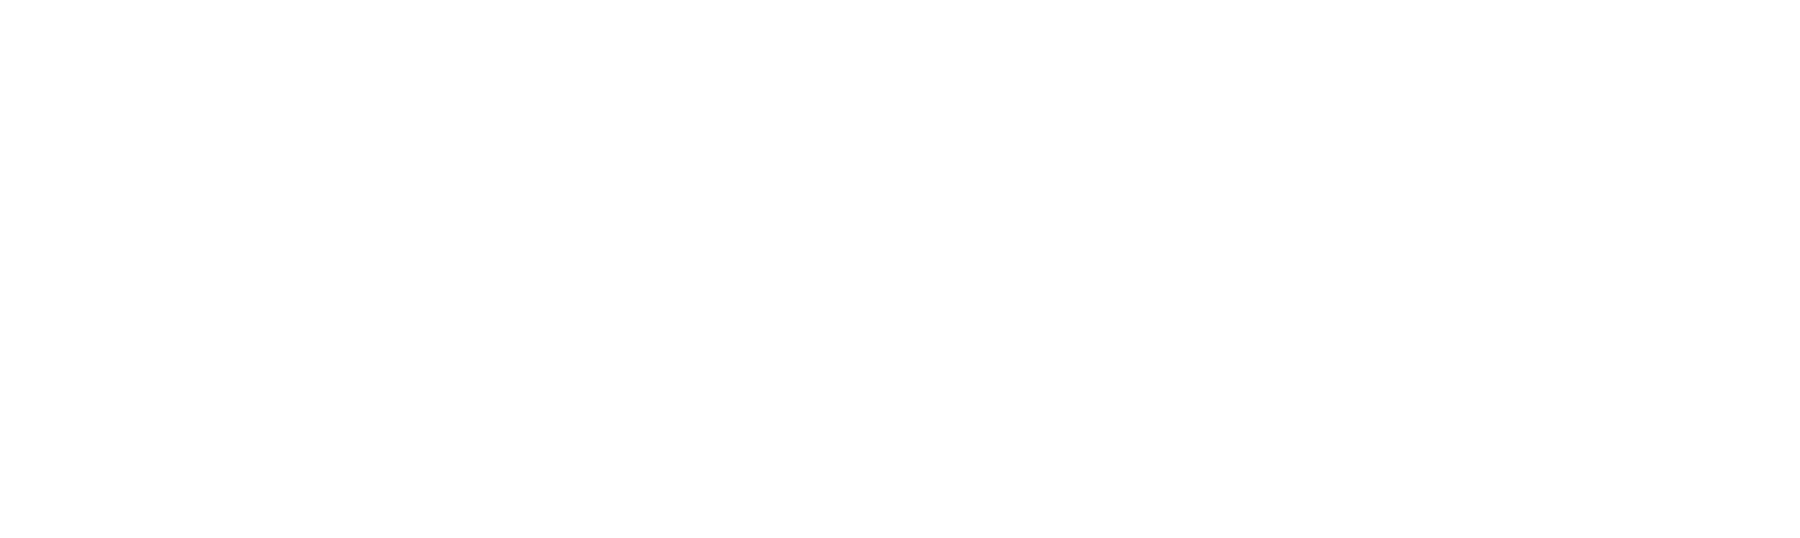 Michelson Center for Public Policy Logo